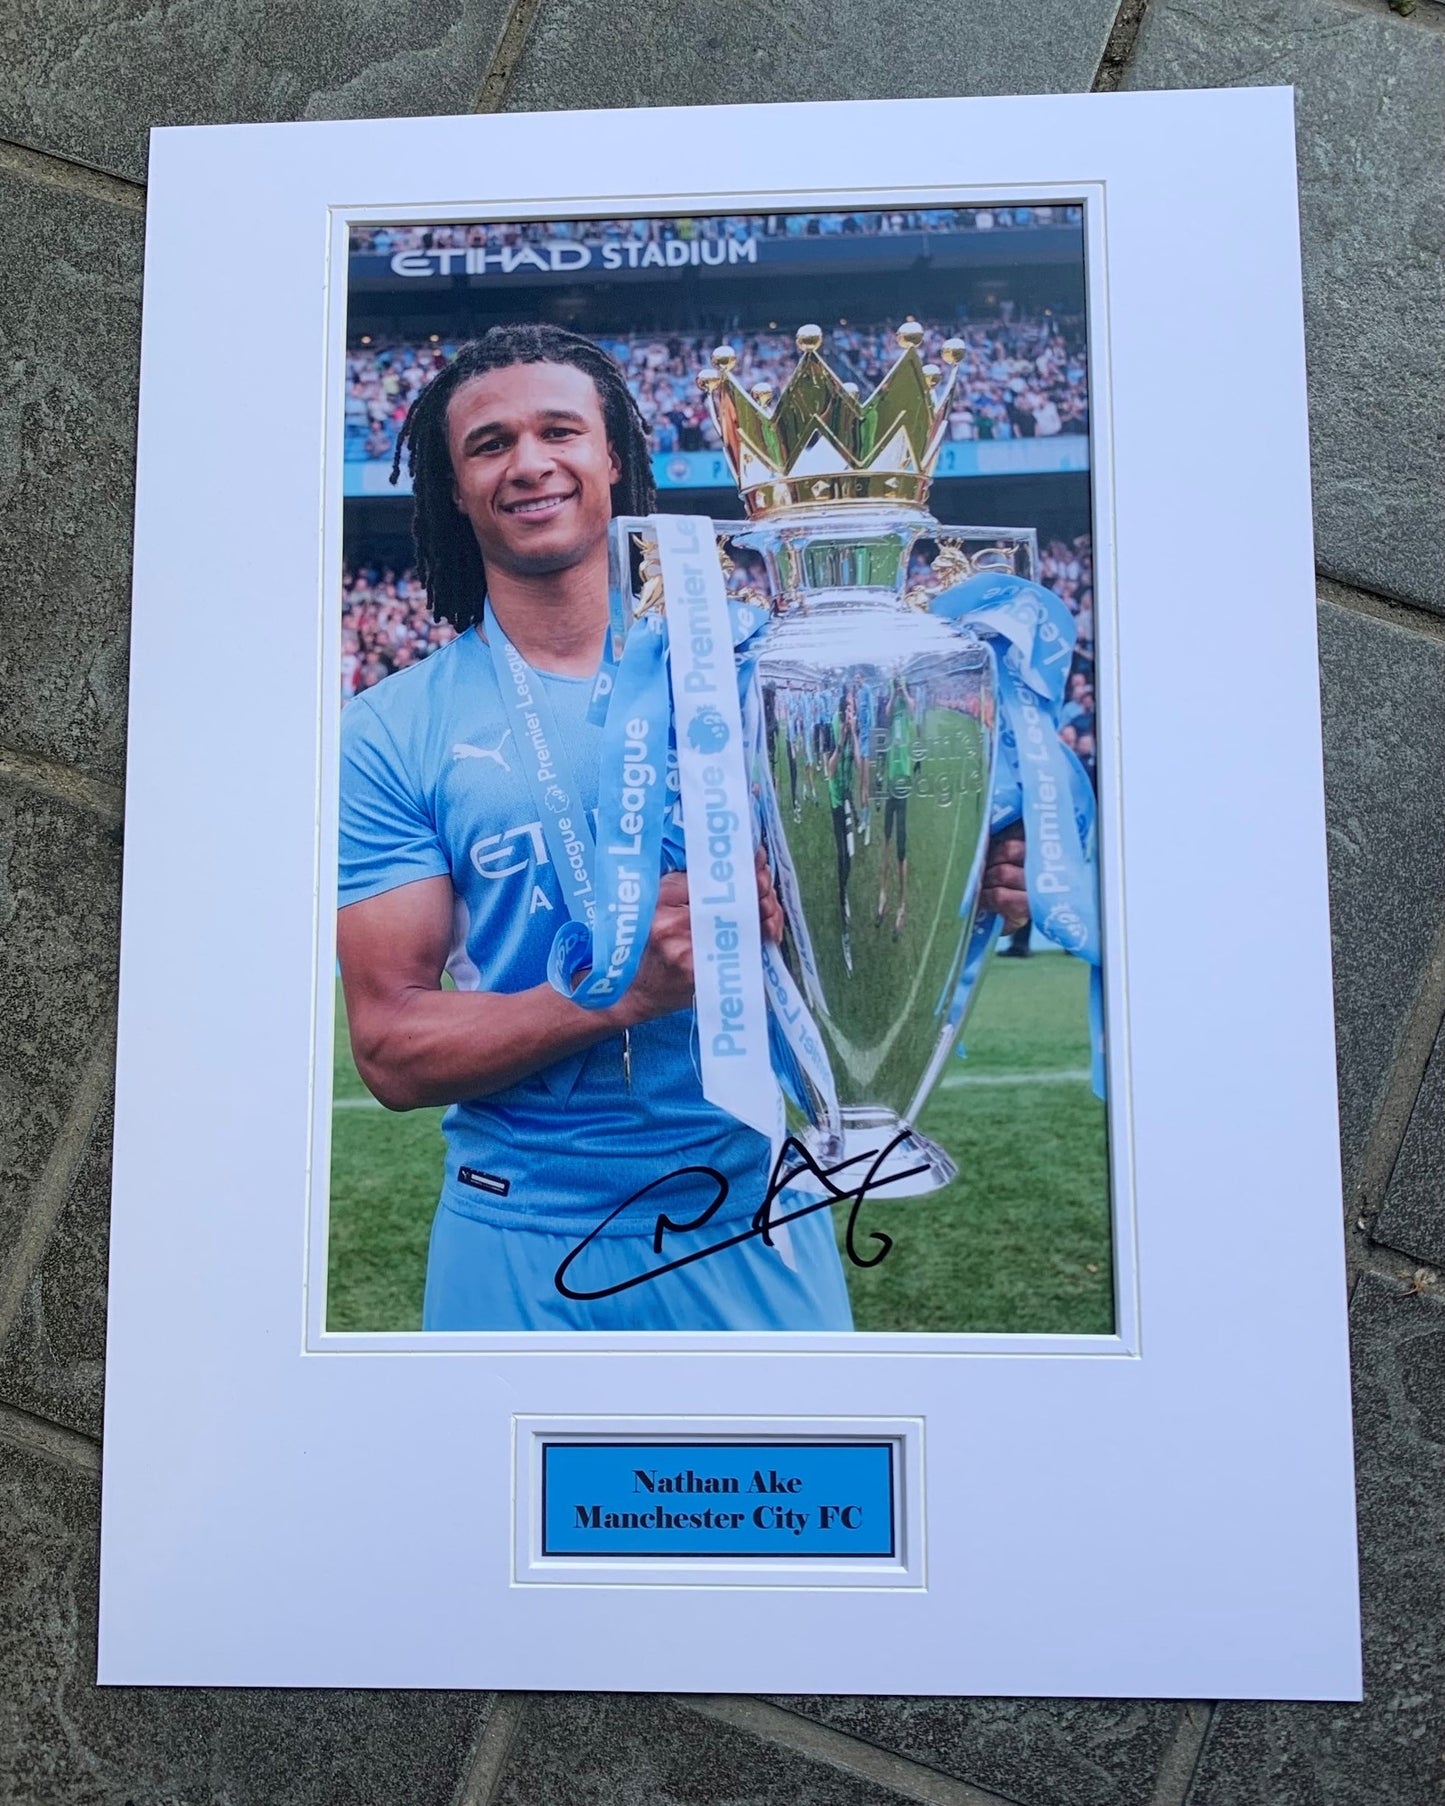 Nathan Ake - Manchester City FC -16x12in signed photo montage - MCFC memorabilia, gift, display